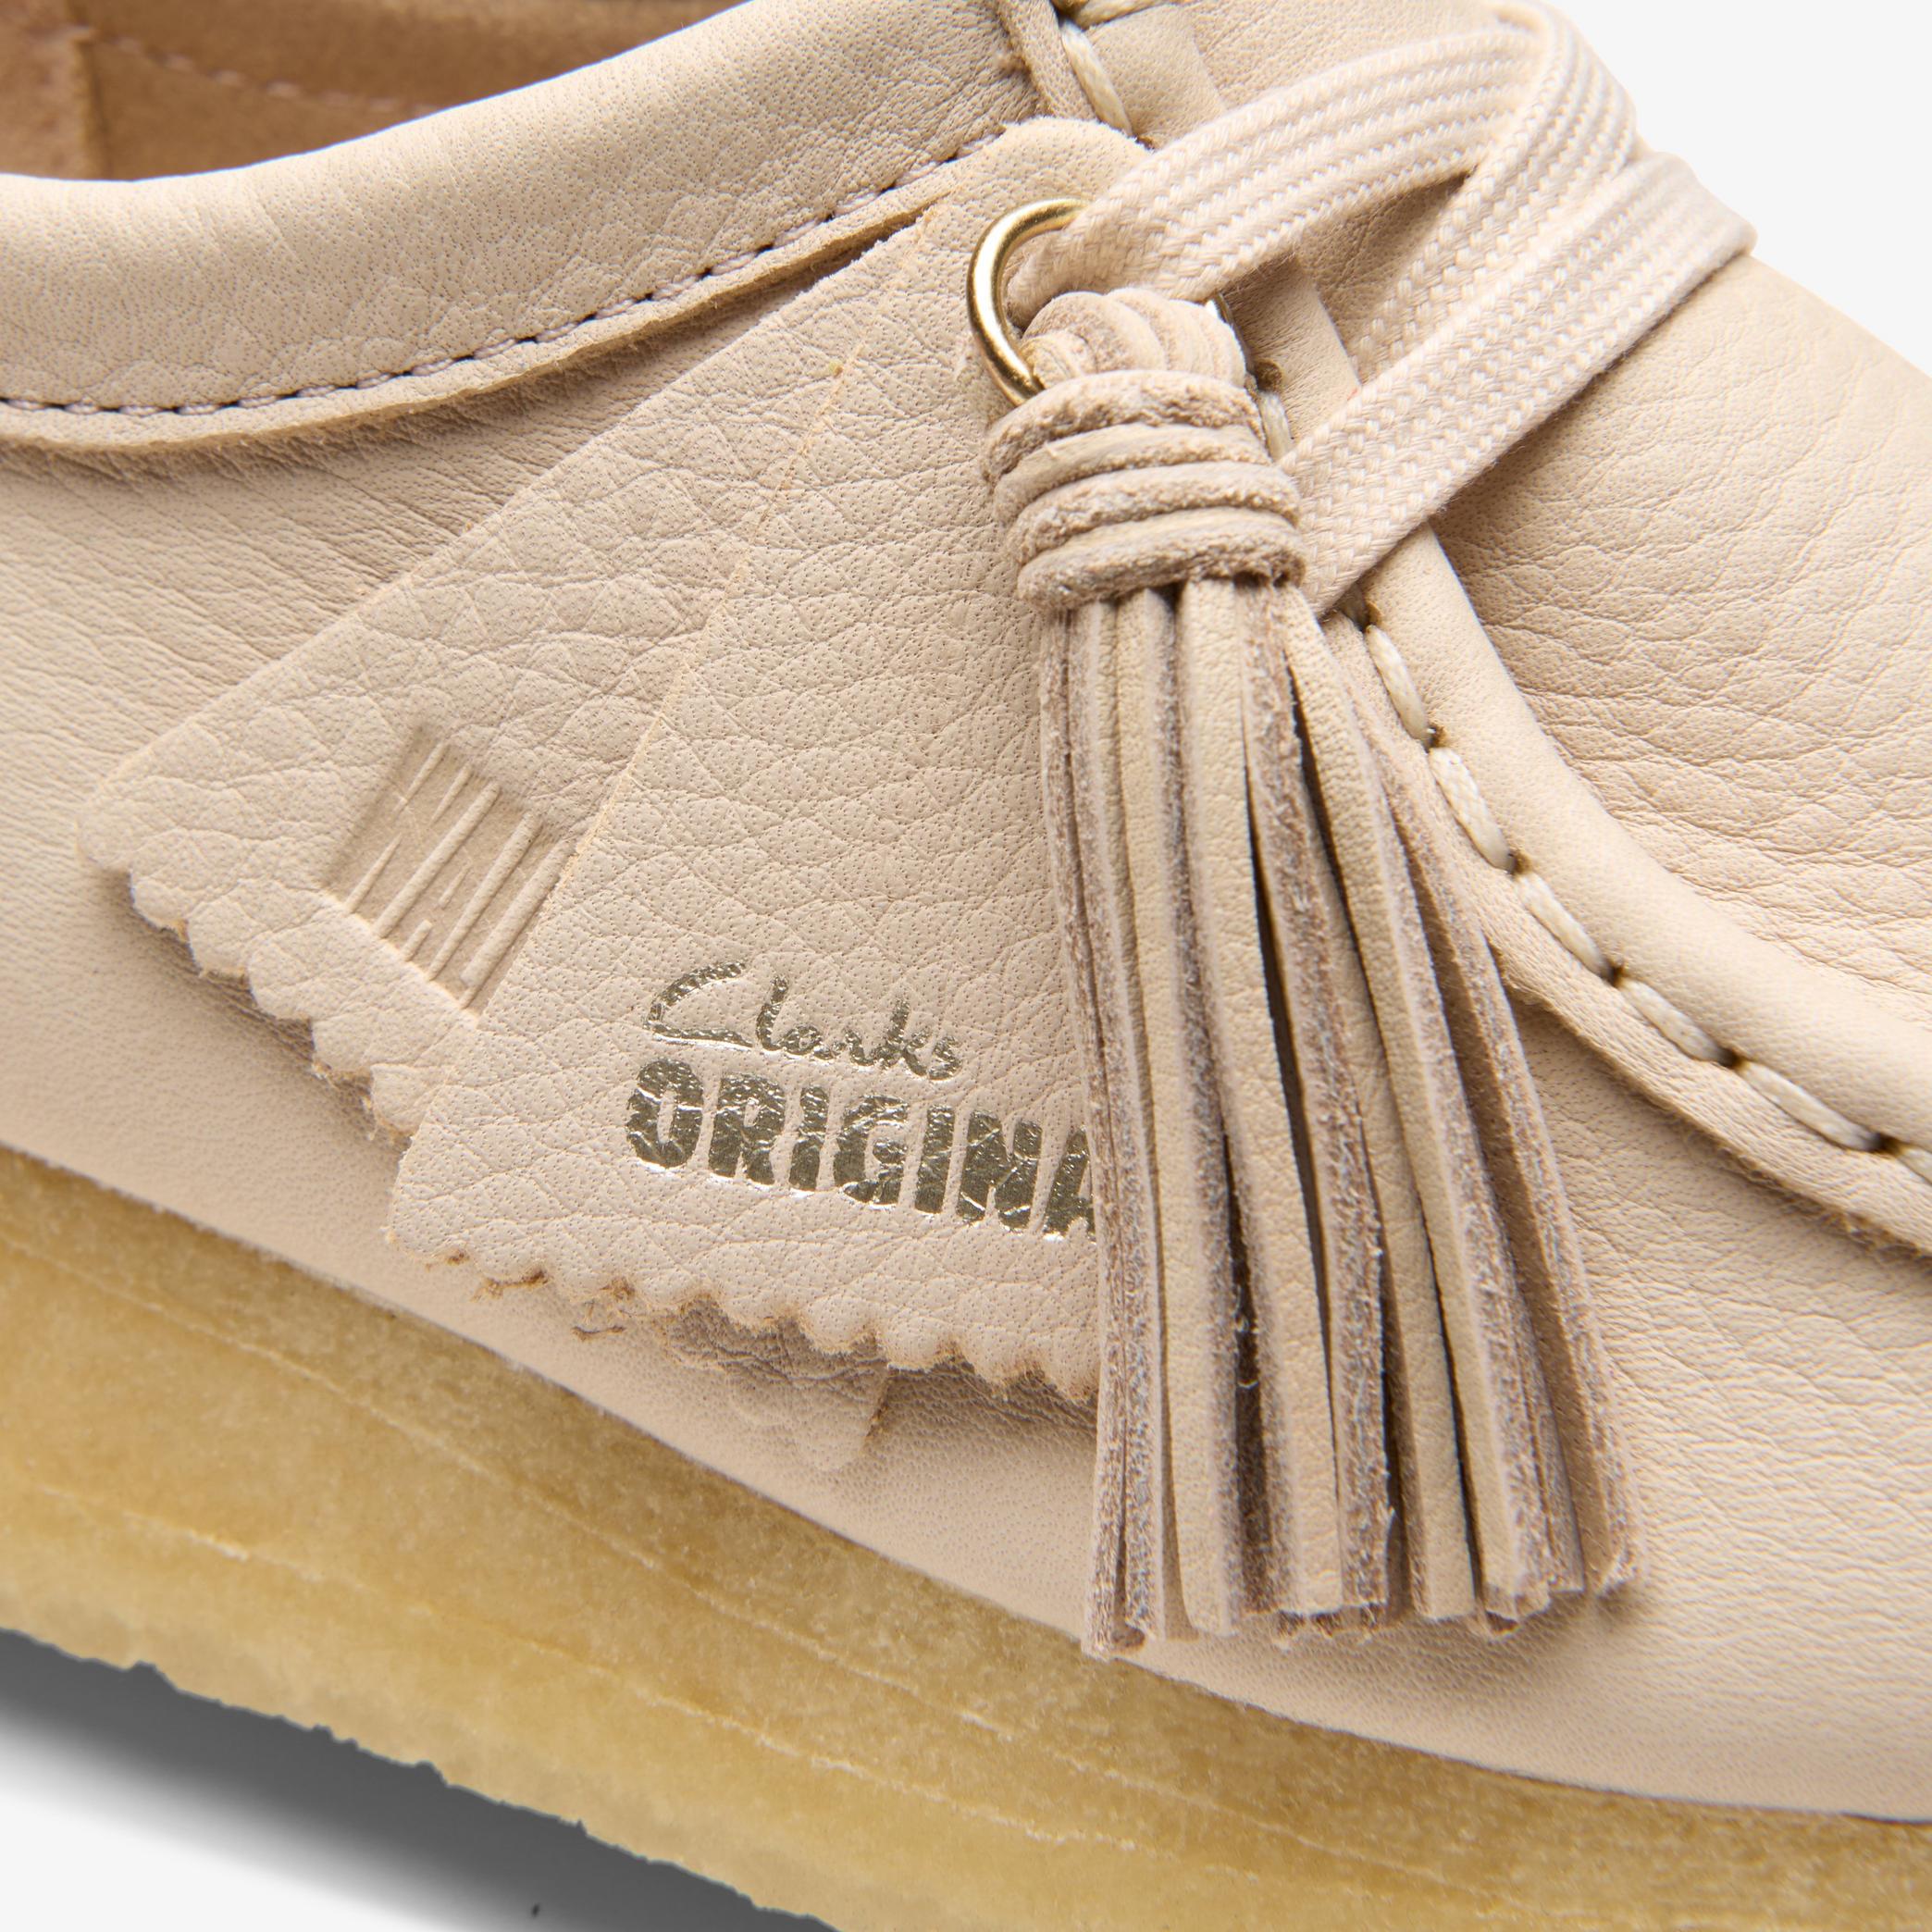 Wallabee Beige Leather Shoes, view 7 of 7